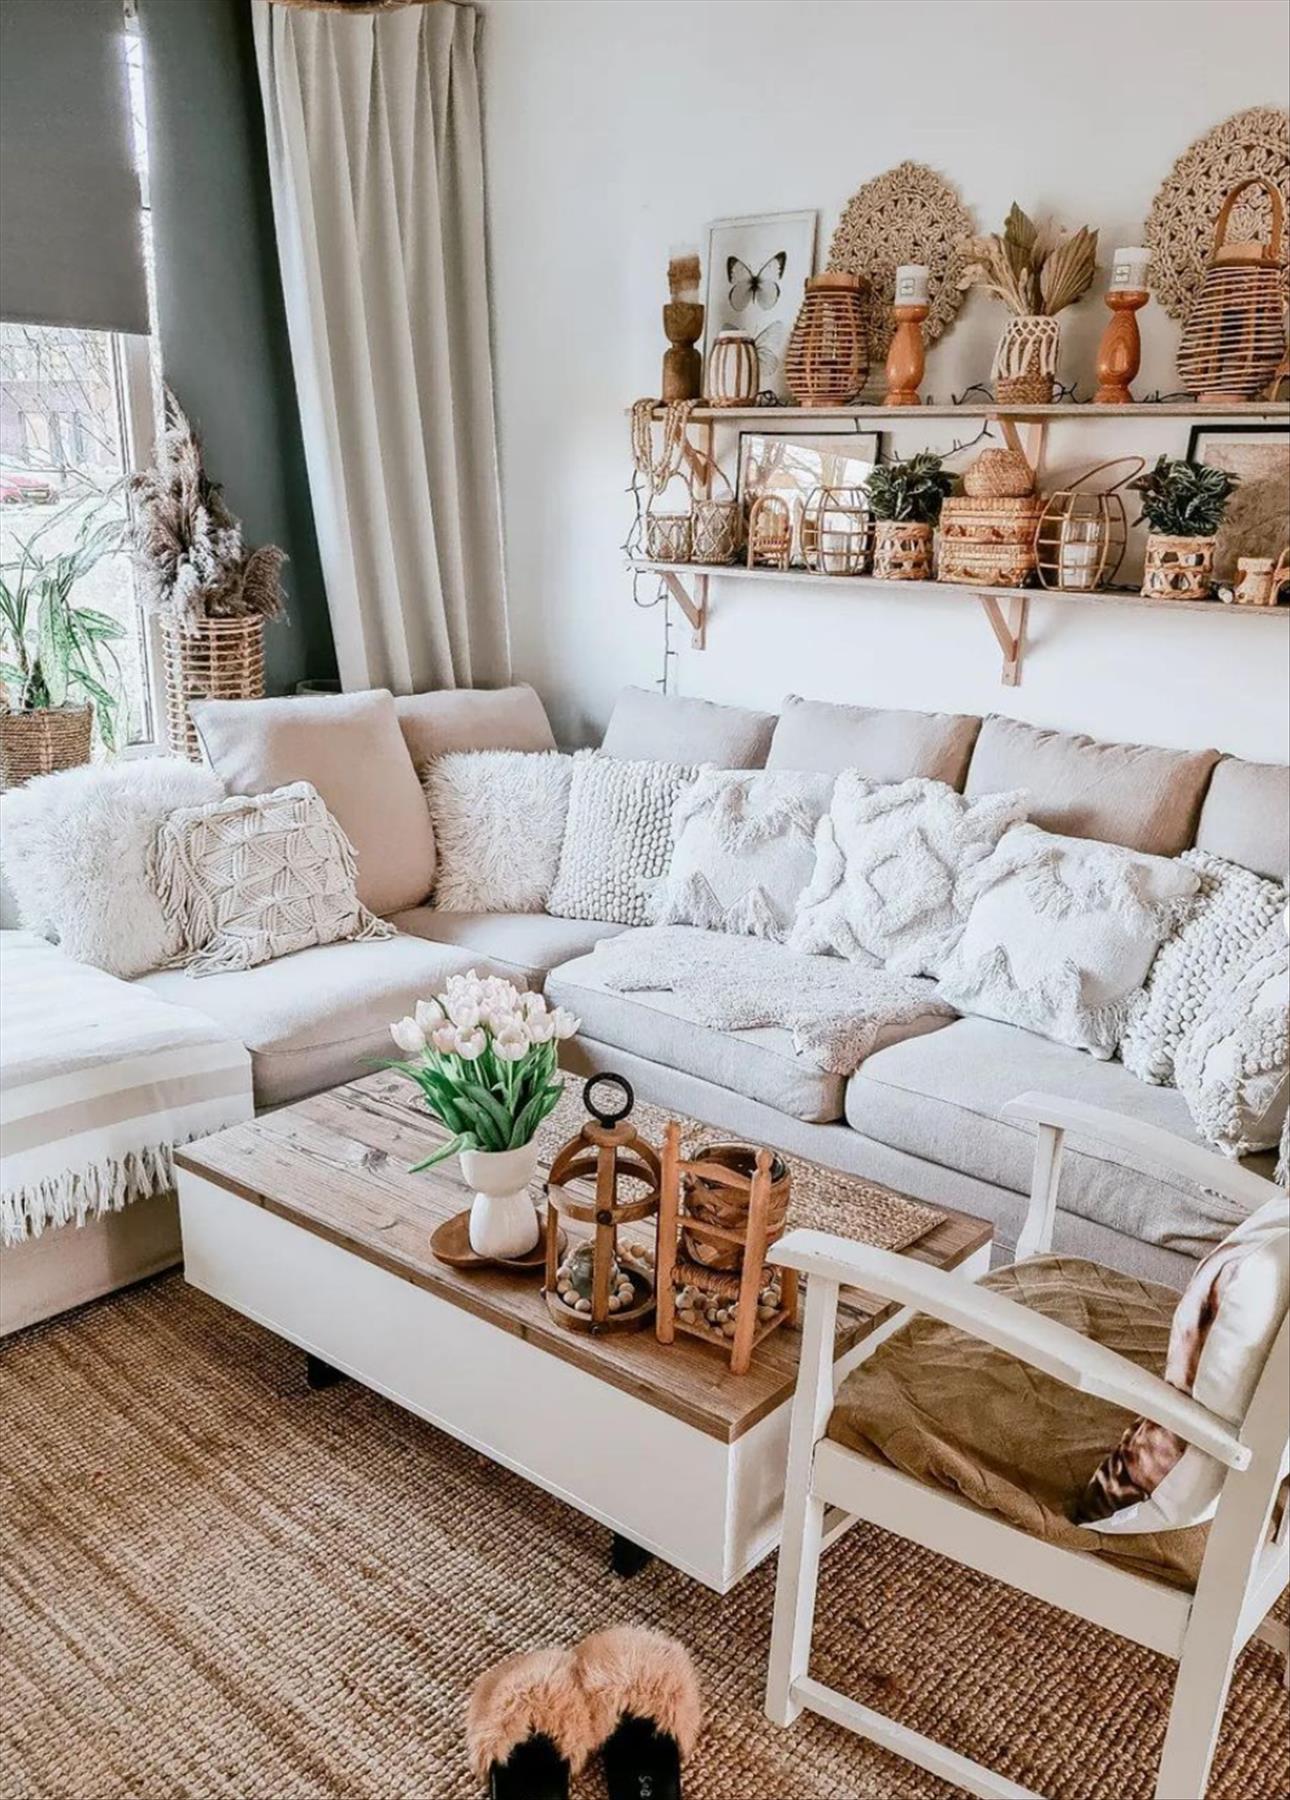 Cozy bohemian living room decorations inspiration for Summer